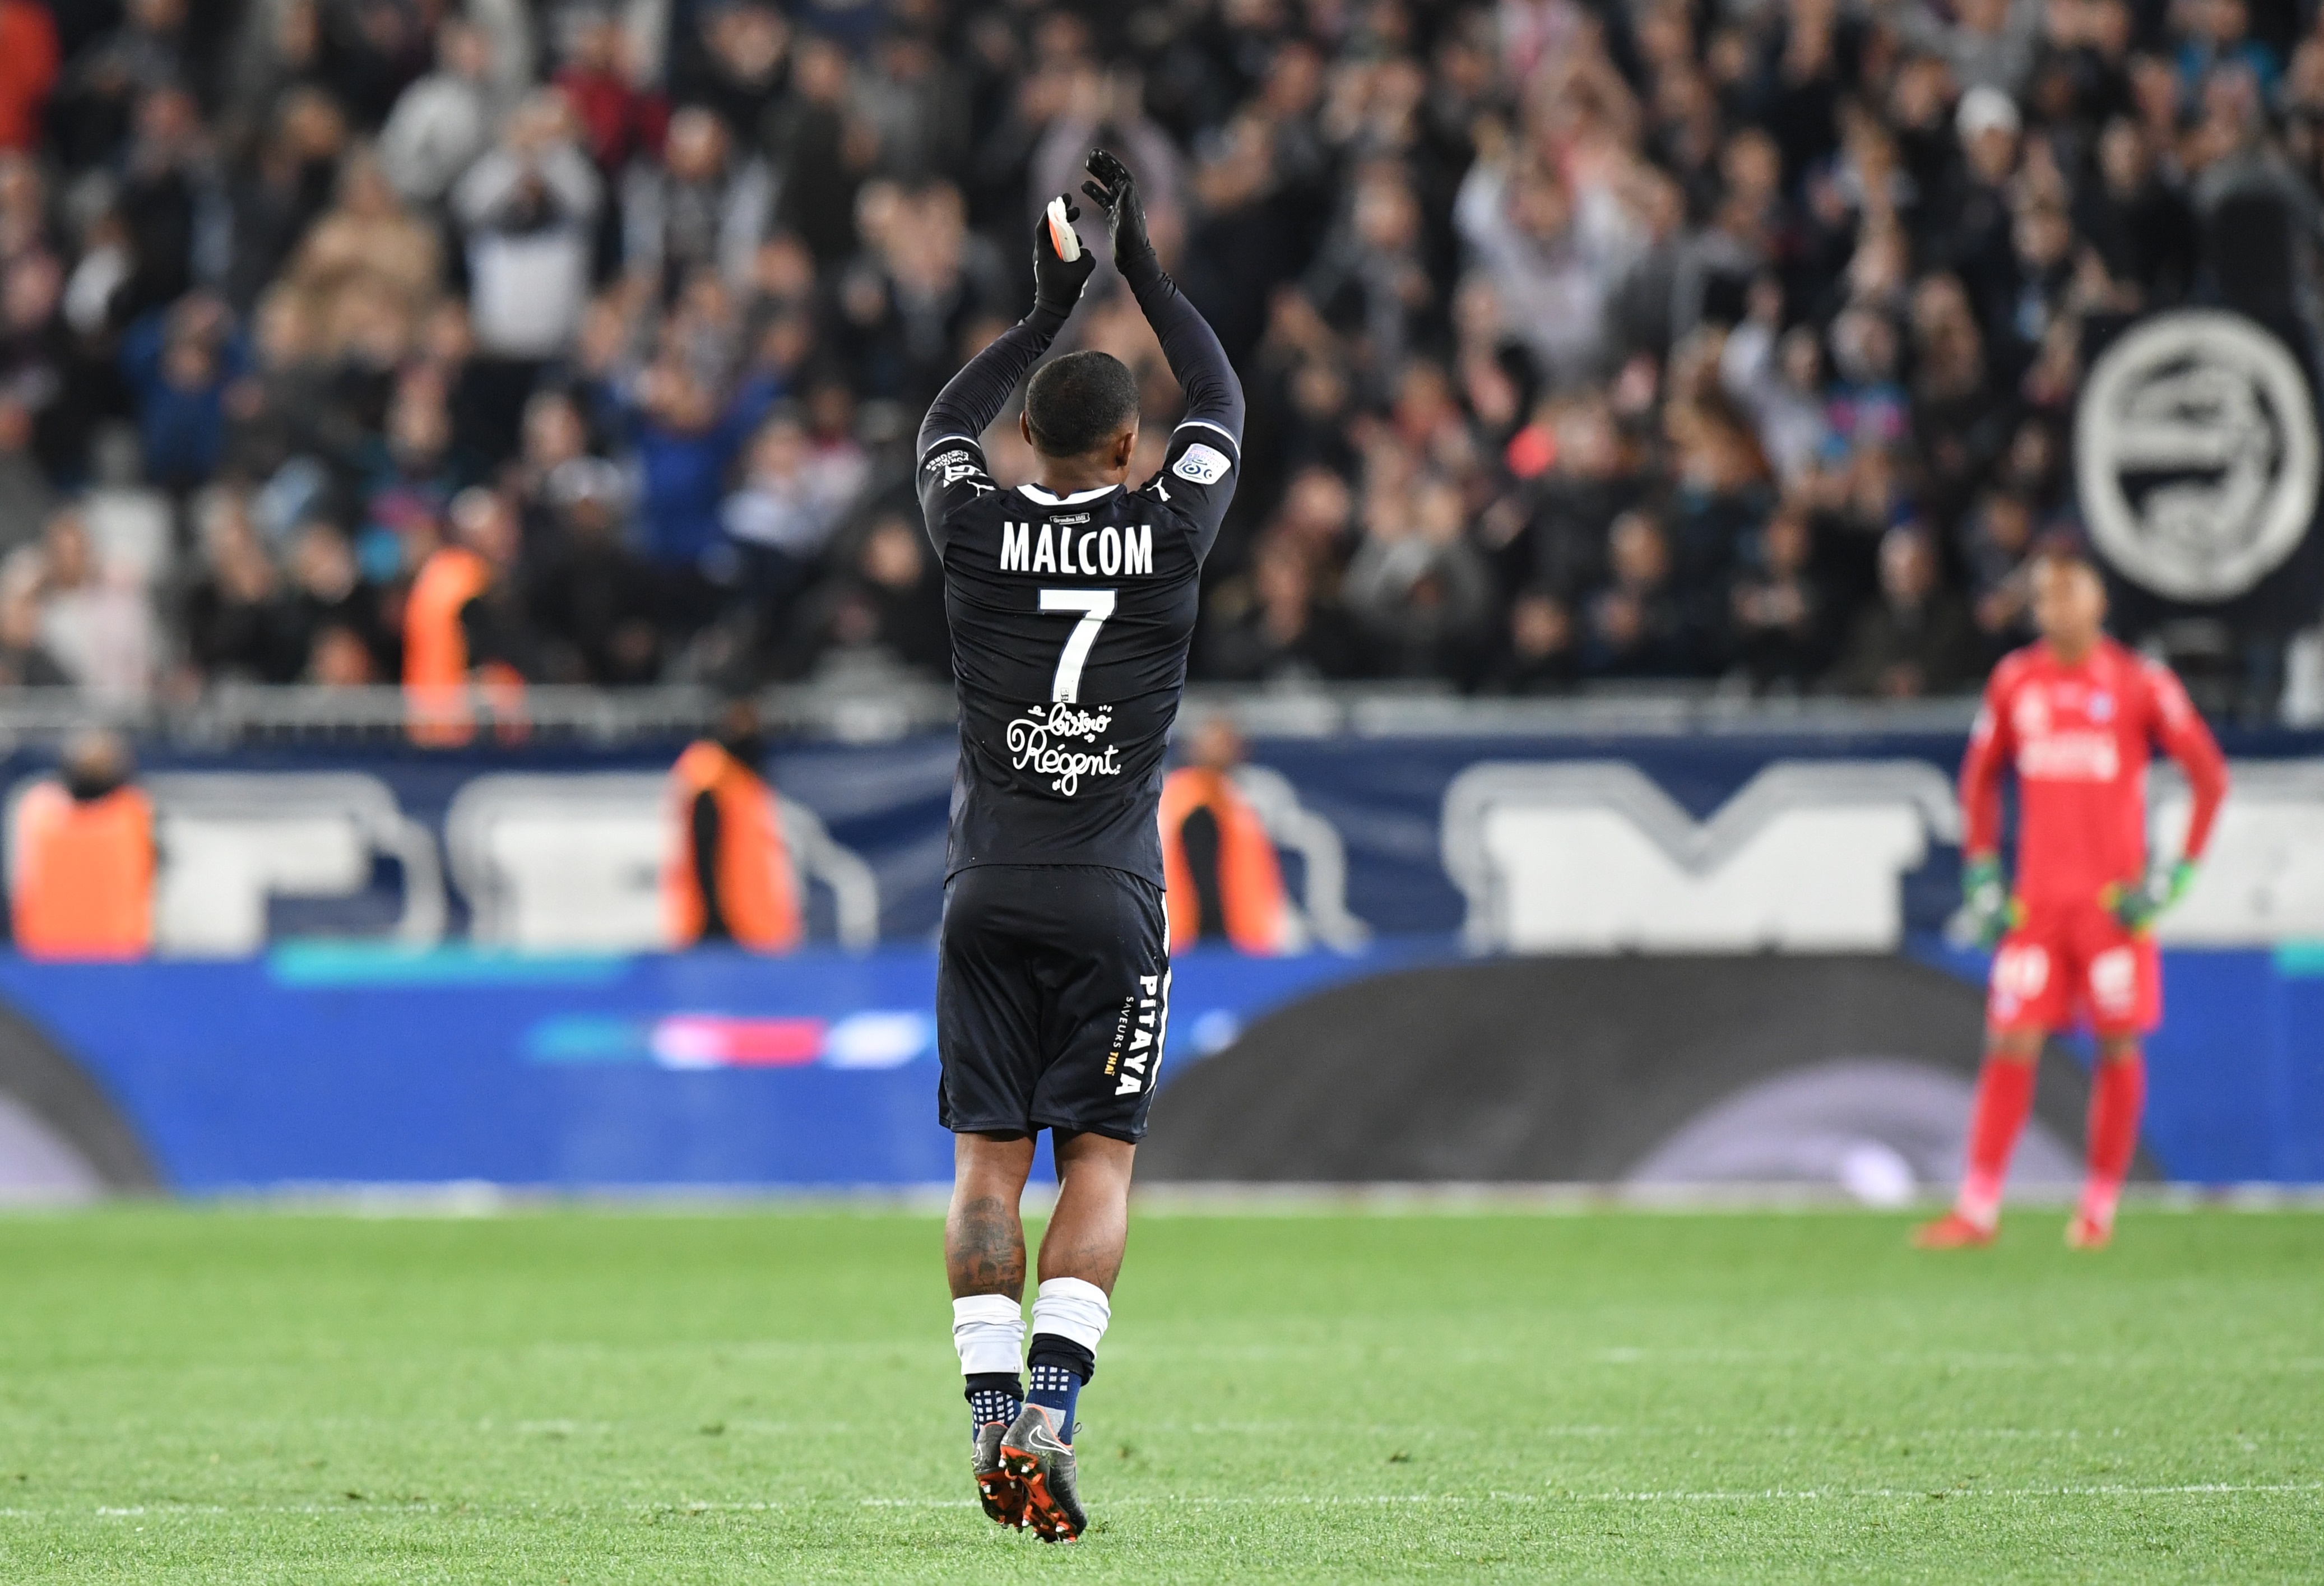 Bordeaux's player Malcom acknowledges the fans after scoring a goal during the French L1 football match Bordeaux vs Toulouse on May 12, 2018 at the Matmut Stadium in Bordeaux southwestern. - Malcom scored his last goal for Bordeaux before his departure next season. (Photo by MEHDI FEDOUACH / AFP)        (Photo credit should read MEHDI FEDOUACH/AFP/Getty Images)